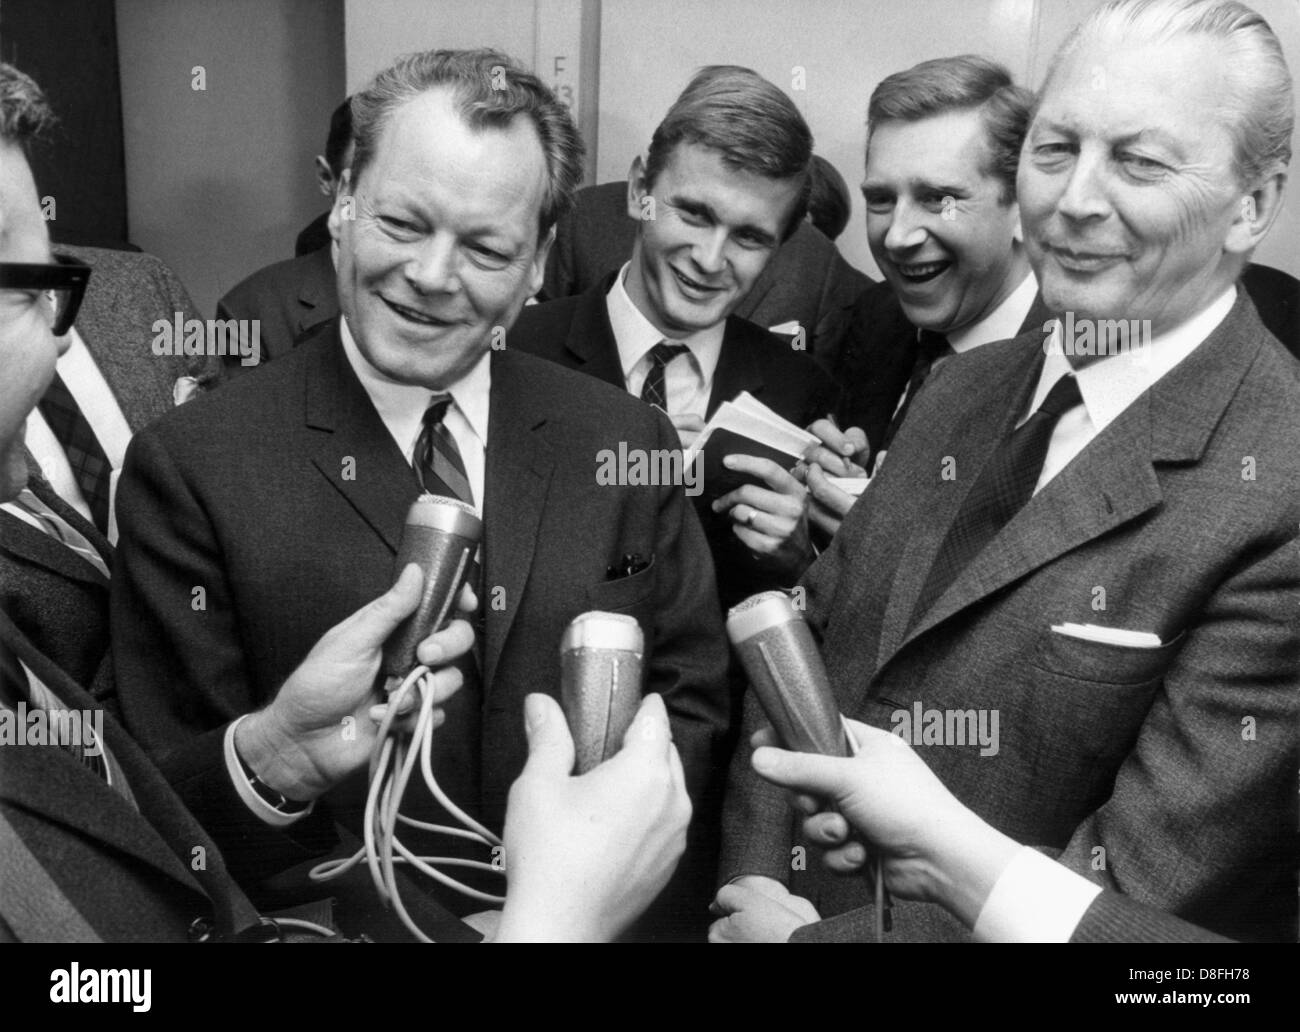 Chairman of the SPD Willy Brandt and chancellor candidate of the CDU Kurt Georg Kiesinger answer questions by journalists concerning their talks about a possible grand coalition on the 24th of November in 1966. The cabinet Kiesinger was sworn in on the 1st of December in 1966, consisting of a grand coalition of CDU/CSU and SPD. Stock Photo